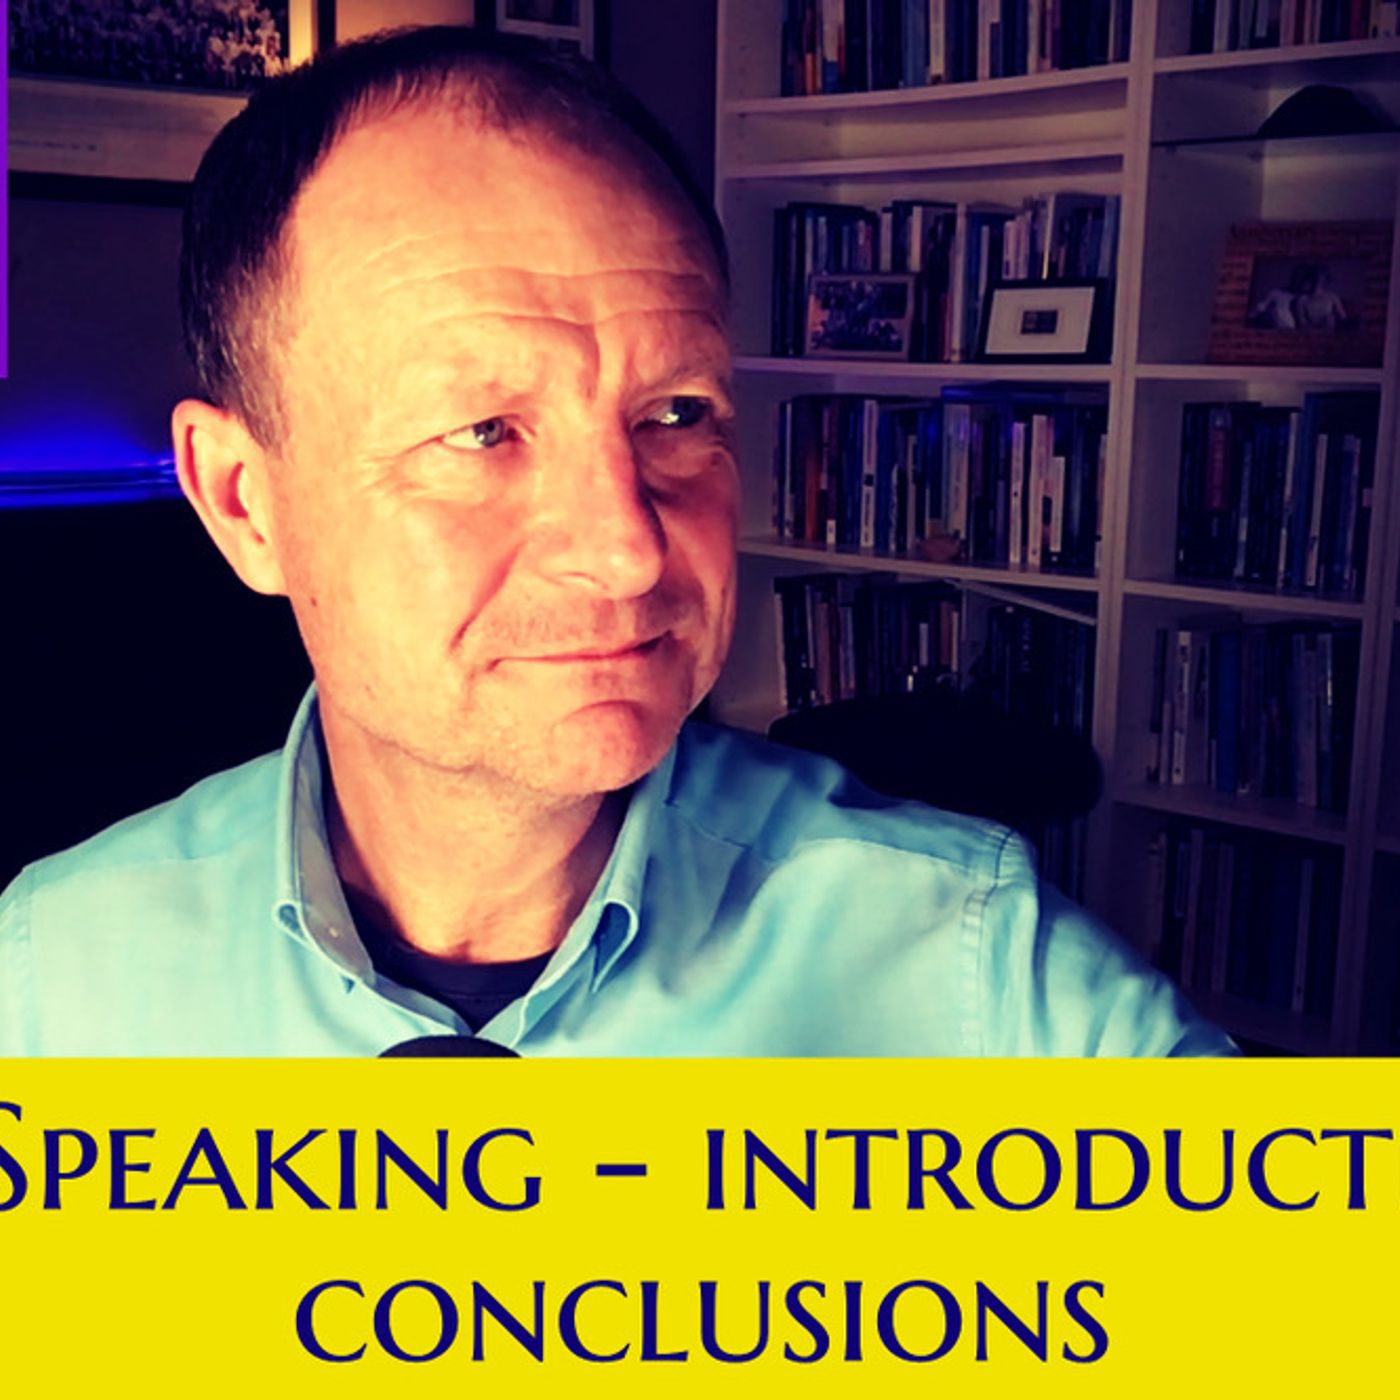 S2 Ep2172: Teaching Tip 354 | “Plain Speaking - rousing introductions and conclusions” | Malcolm Cox